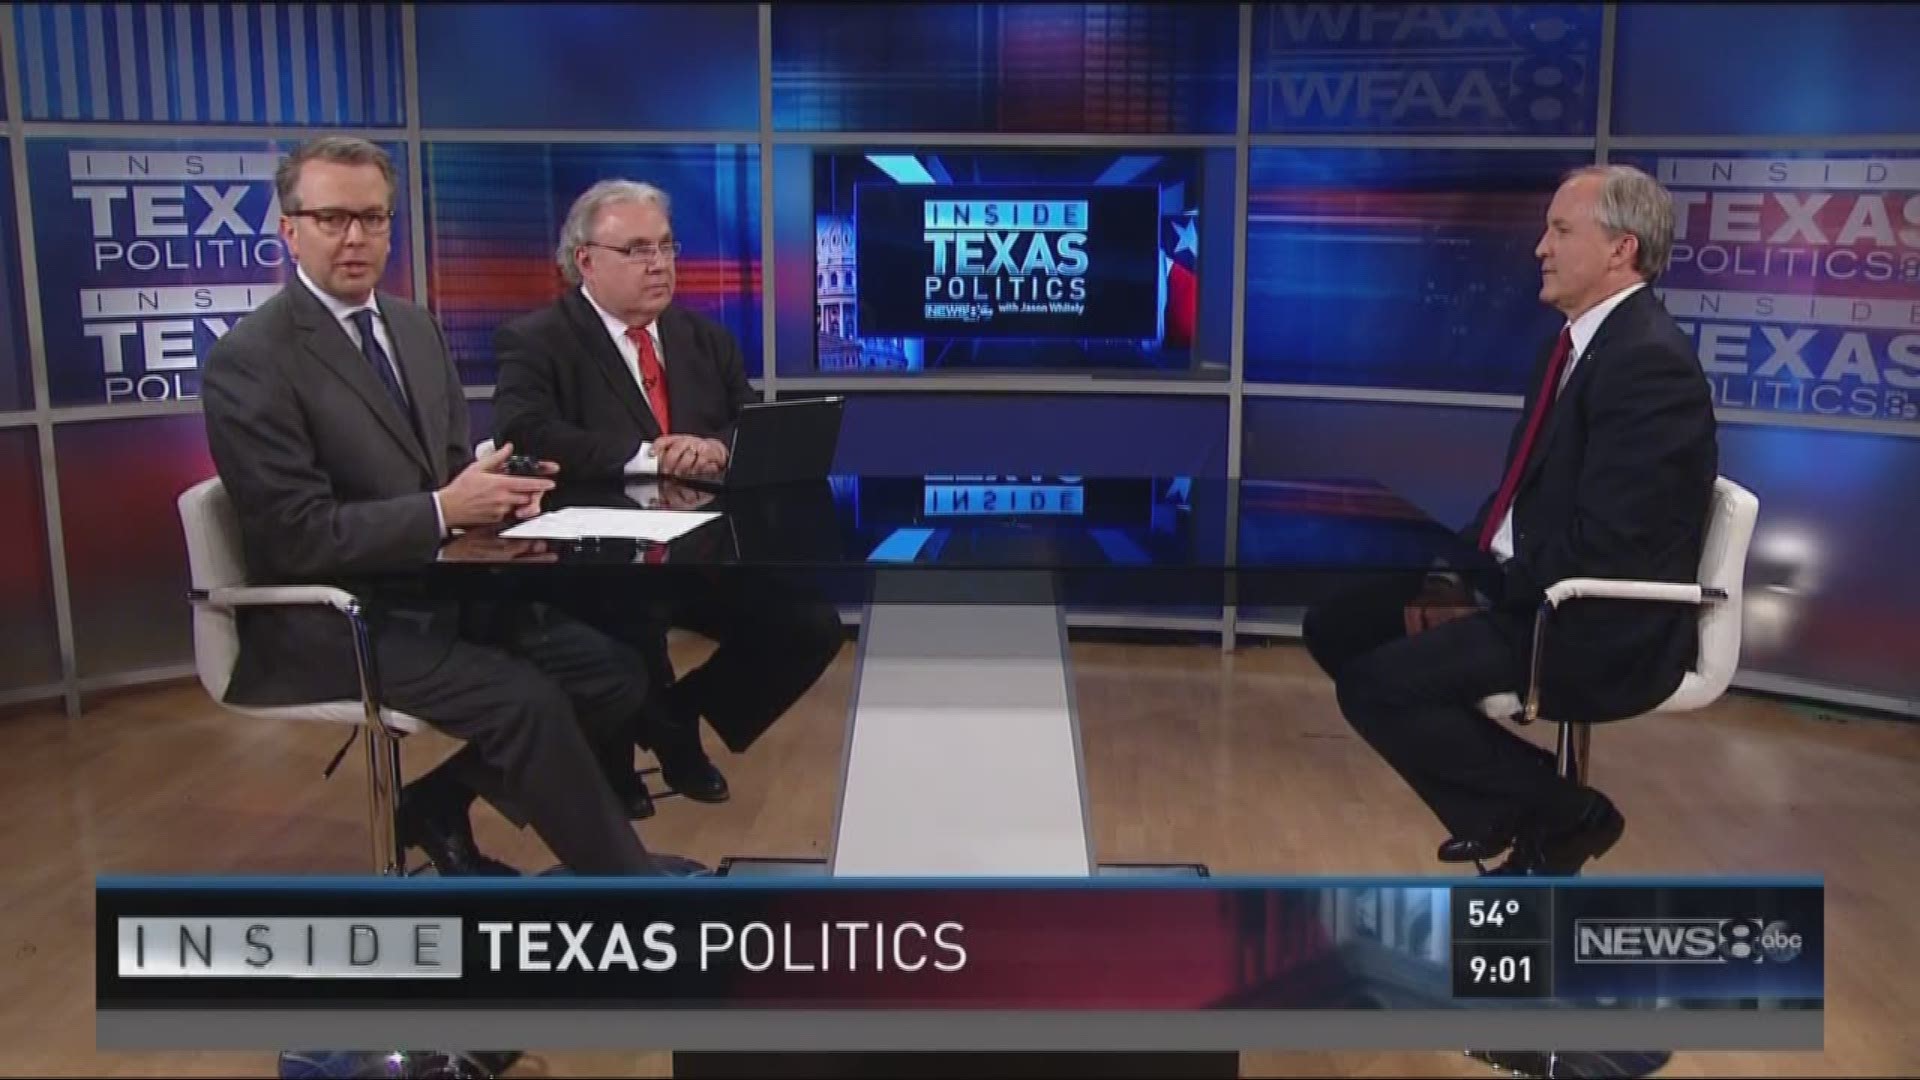 Inside Texas Politics began with Texas Attorney General Ken Paxton explaining why he might sue the Trump administration. Paxton also discussed the Texas case going before the Supreme Court on Tuesday, April 22, 2018.  Justices will decide if Texas lawmake